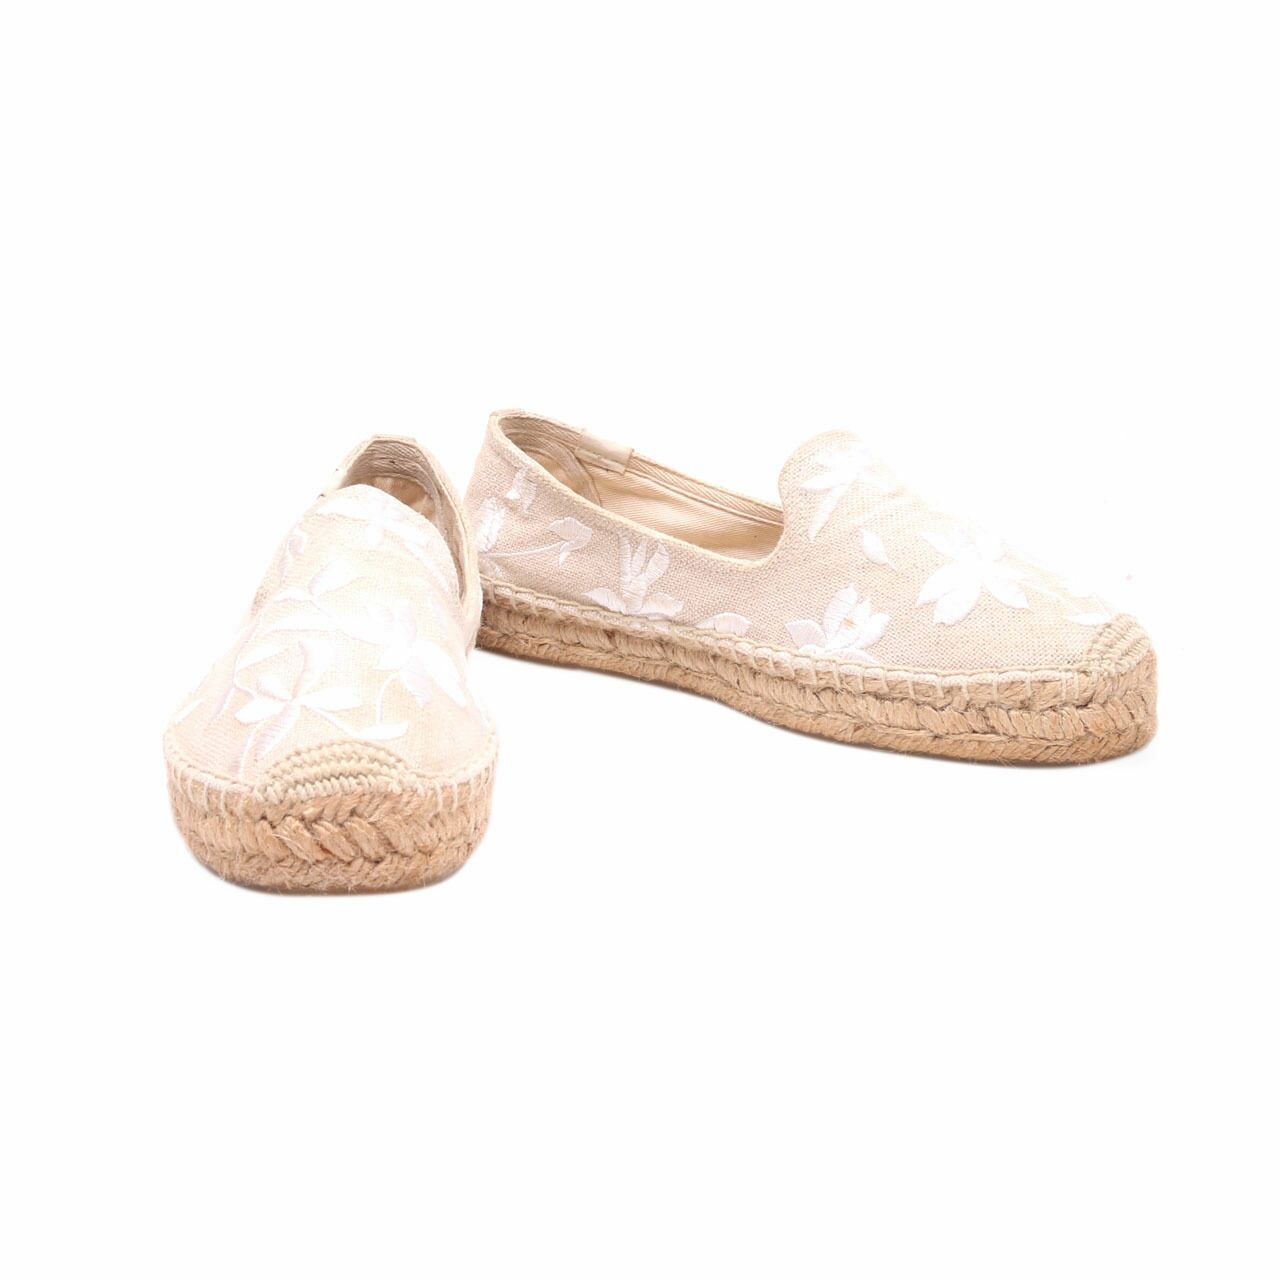 Soludos Beige Shiloh Embroidered Espadrille Loafers Flats